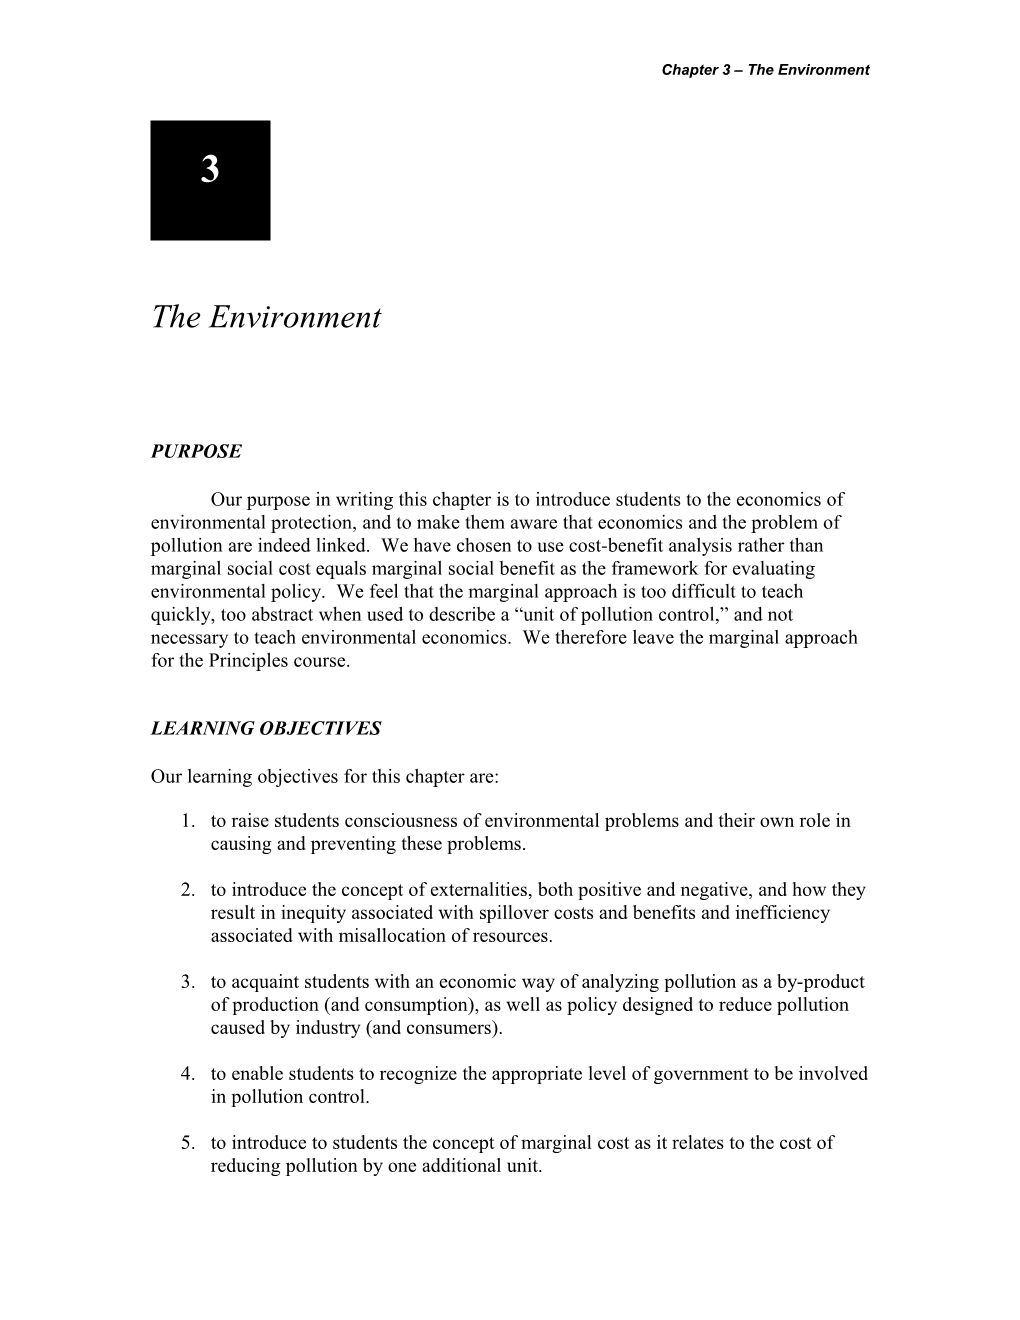 Chapter 3 the Environment